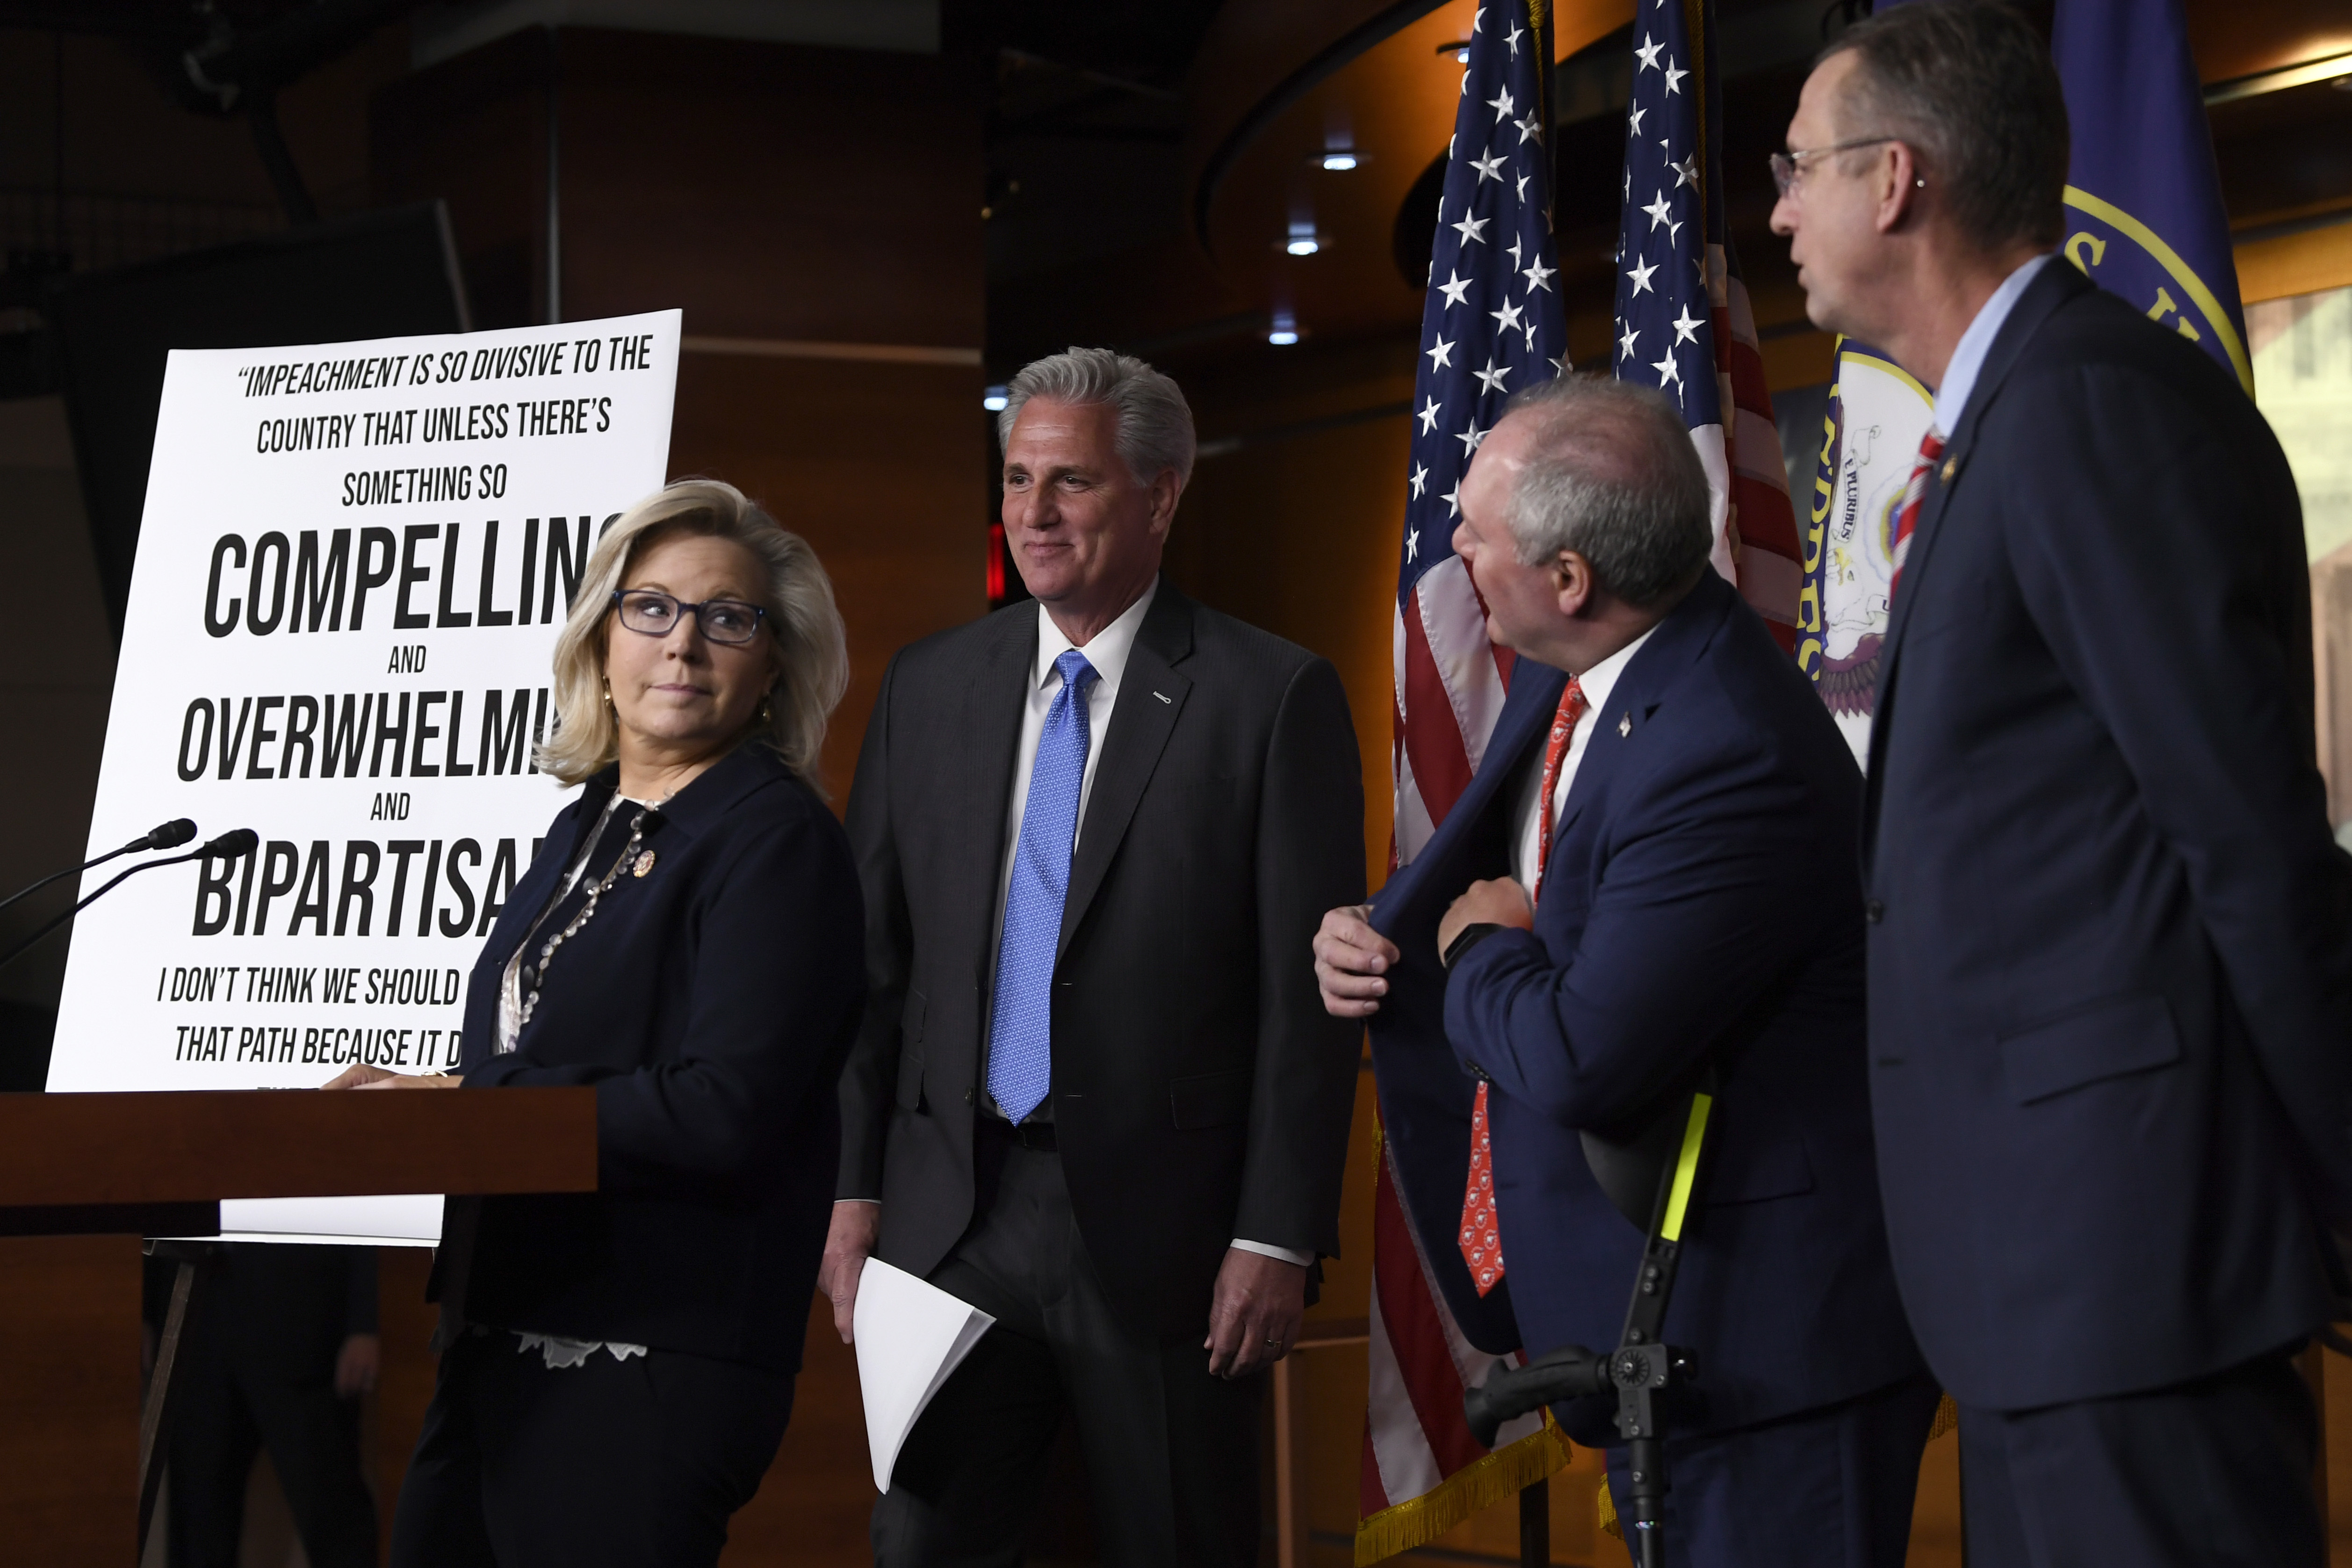 House Minority Leader Kevin McCarthy, second from left, is joined by Rep. Liz Cheney, left, House Minority Whip Steve Scalise, second from right, and House Judiciary Committee ranking member Rep. Doug Collins, right, at the start of a news conference on Capitol Hill in Washington on Dec. 3.